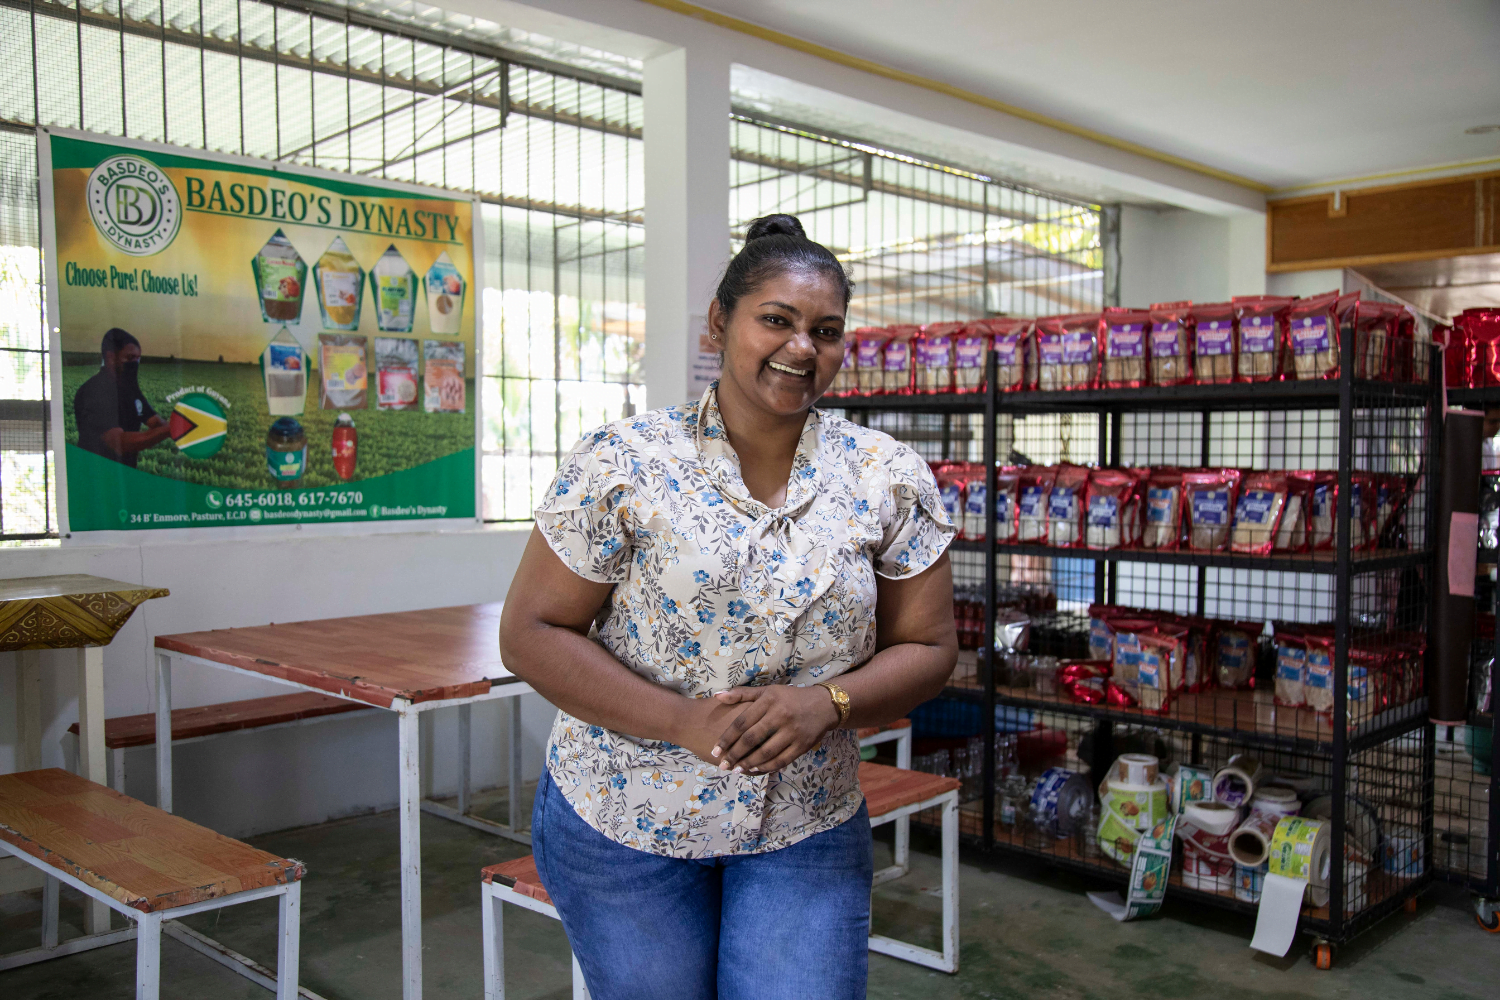 Radhika Basdeo, Sole Proprietress of Basdeo's Dynasty in Guyana smiles in her storefront.